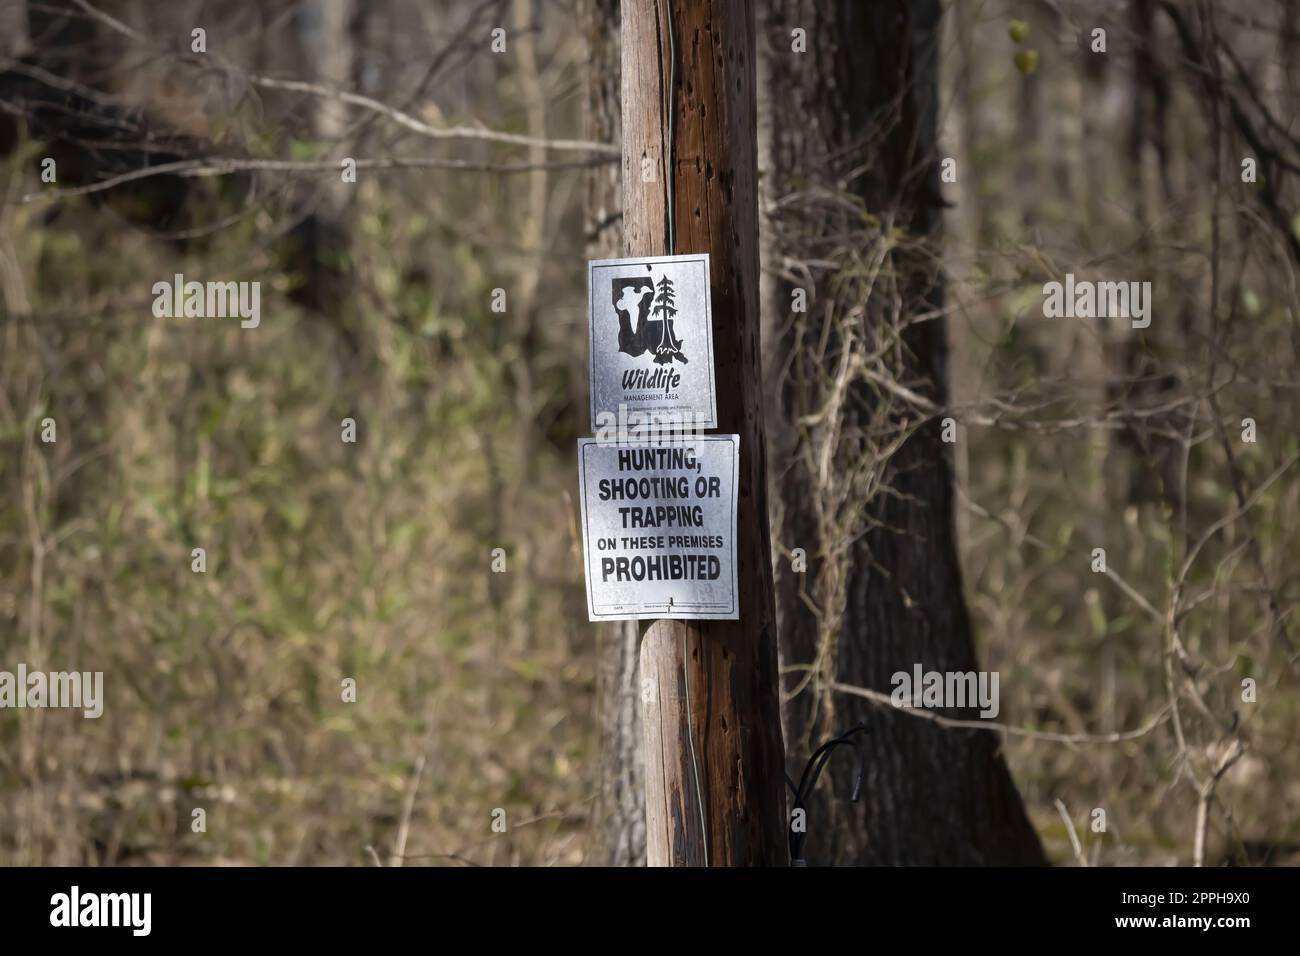 Sign Marking Area Where Shooting, Trapping, and Hunting Are Forbidden Stock Photo